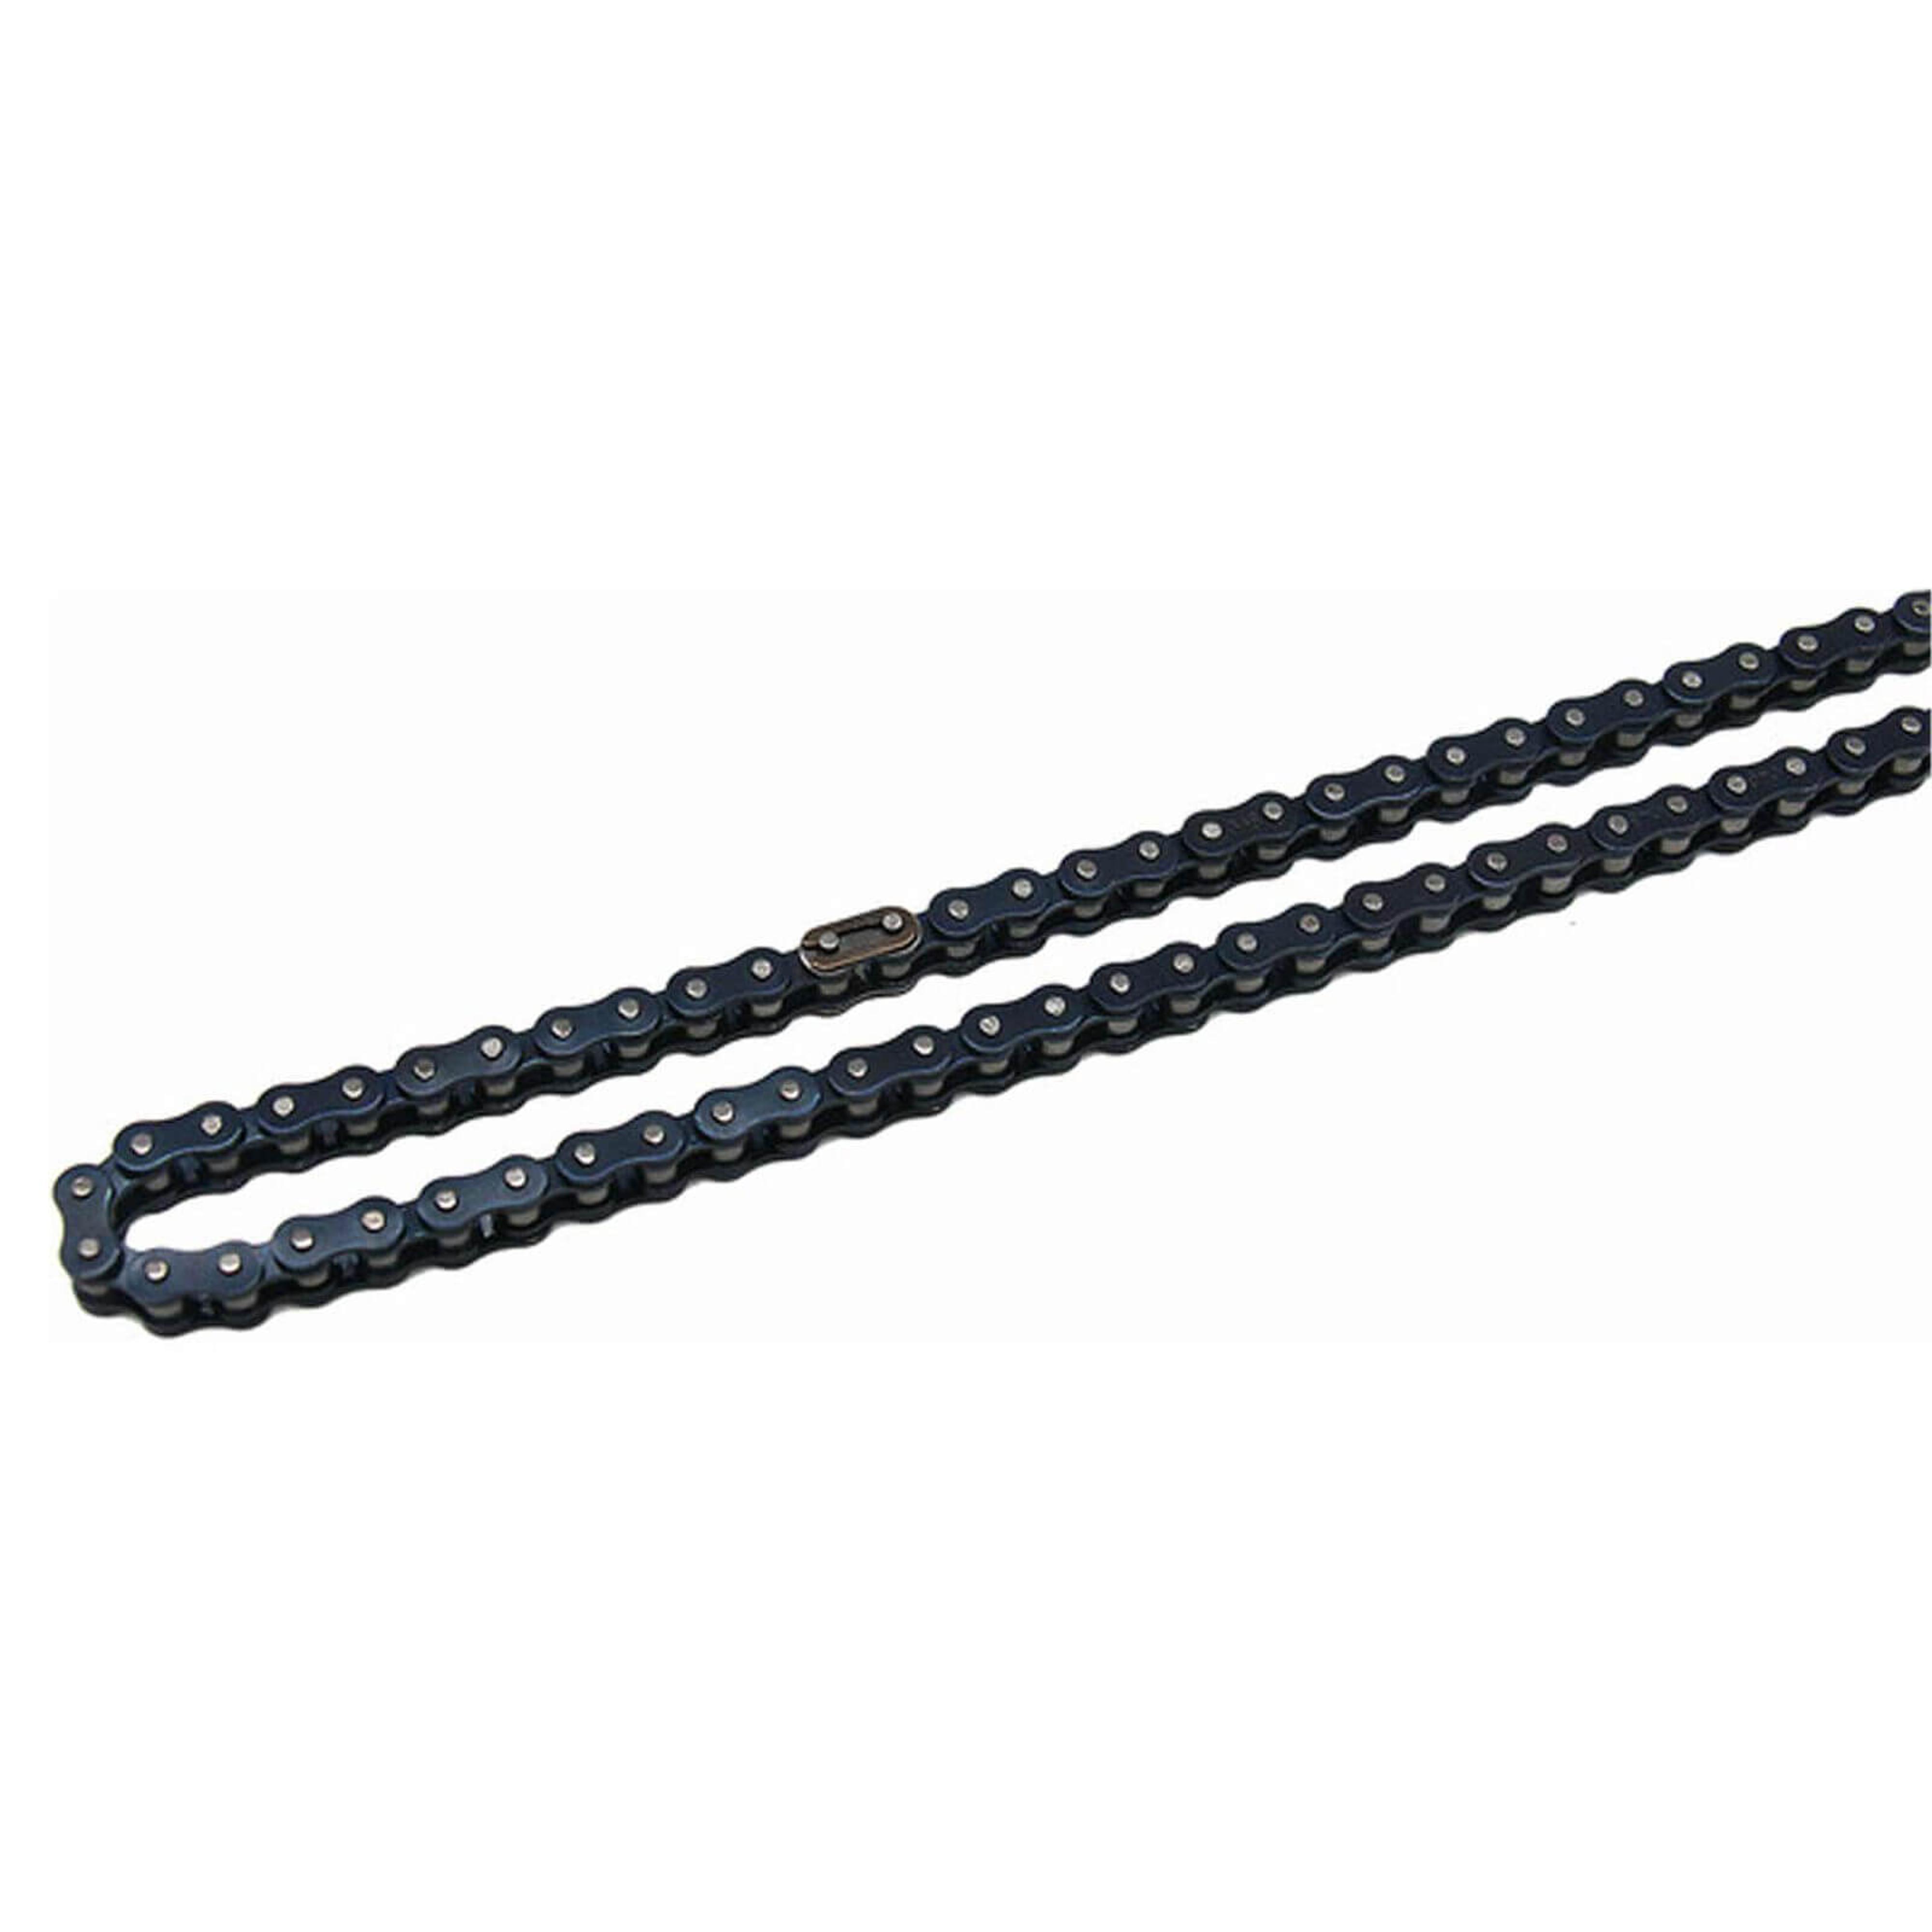 Steel Chain 70 Roller w/ Chain Connector for Promoto-MX